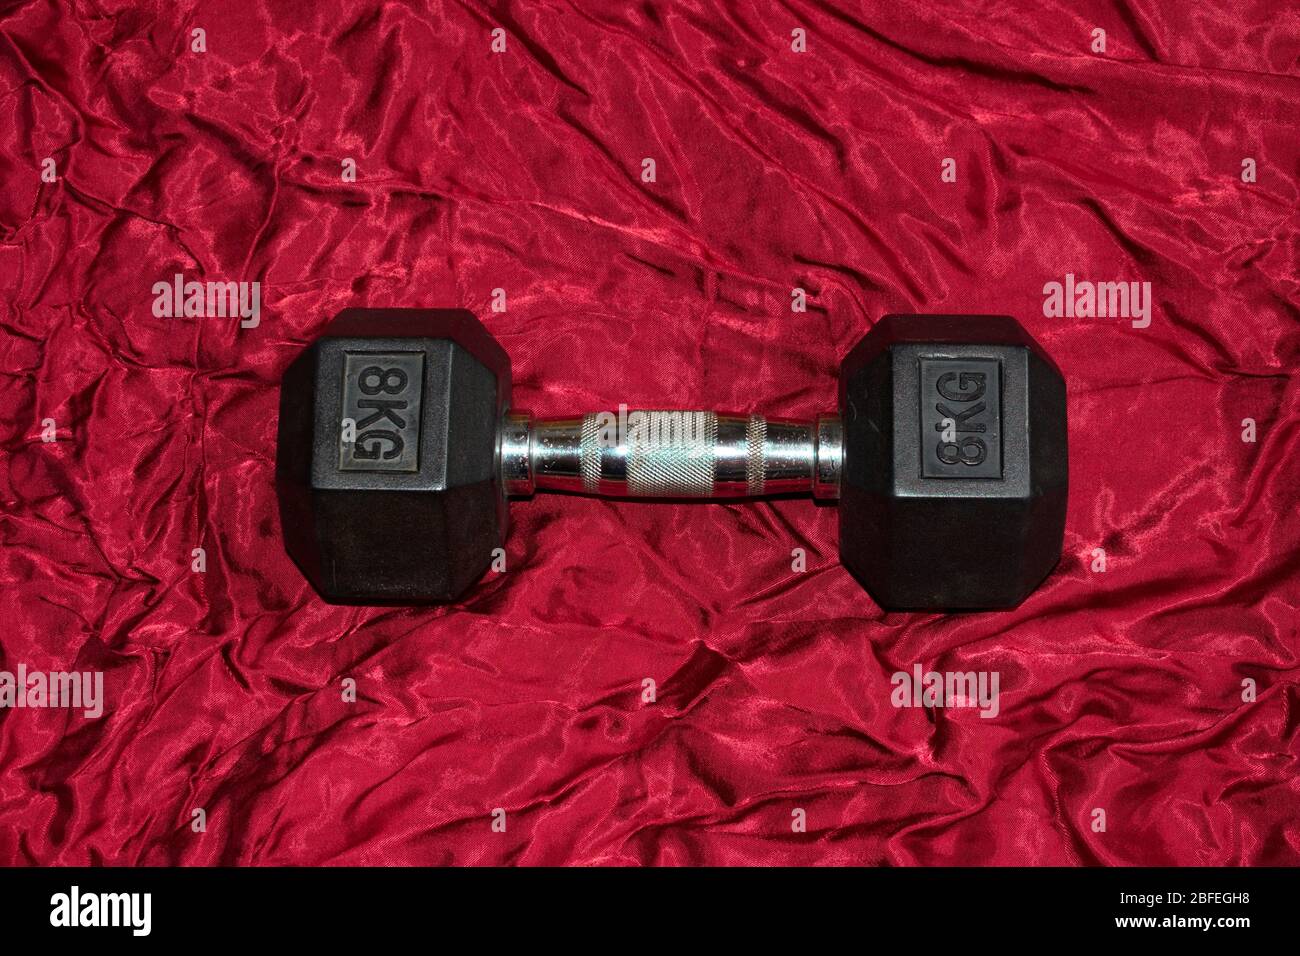 A dumbbell is lying on red satin, ready for working out. Stock Photo